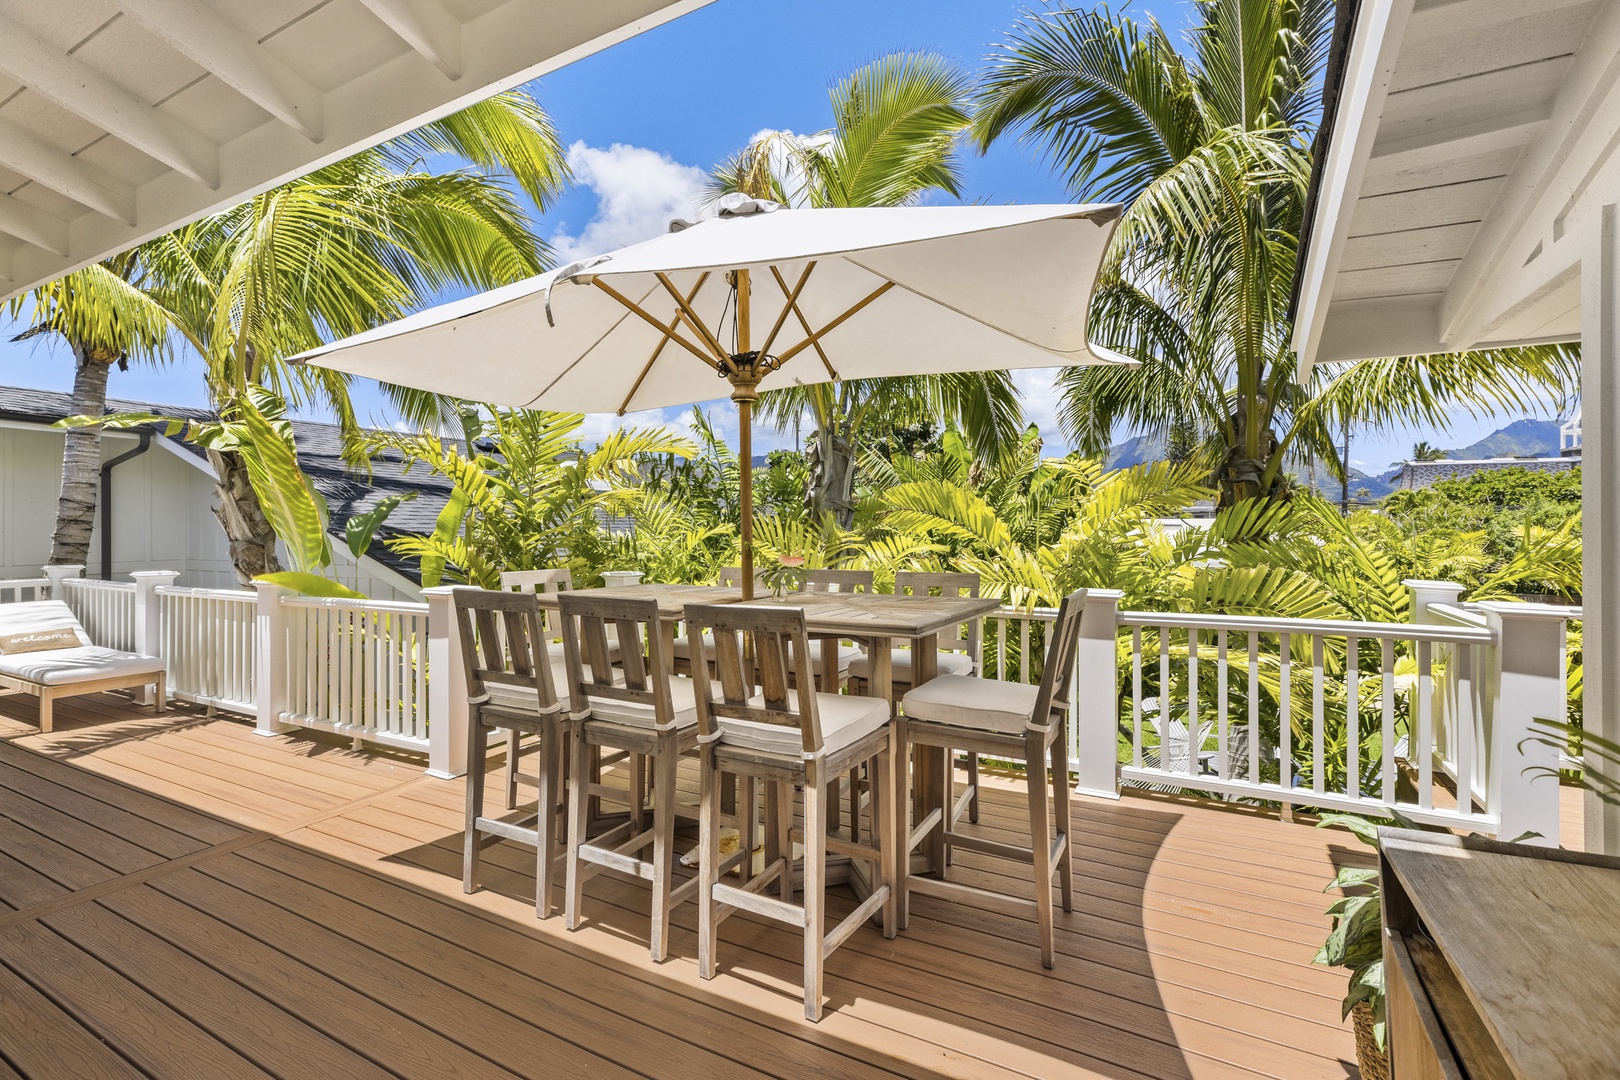 Kailua Vacation Rentals, Seahorse Beach House - Expand your living space outdoors with our front house deck, an extension from the cozy living room.